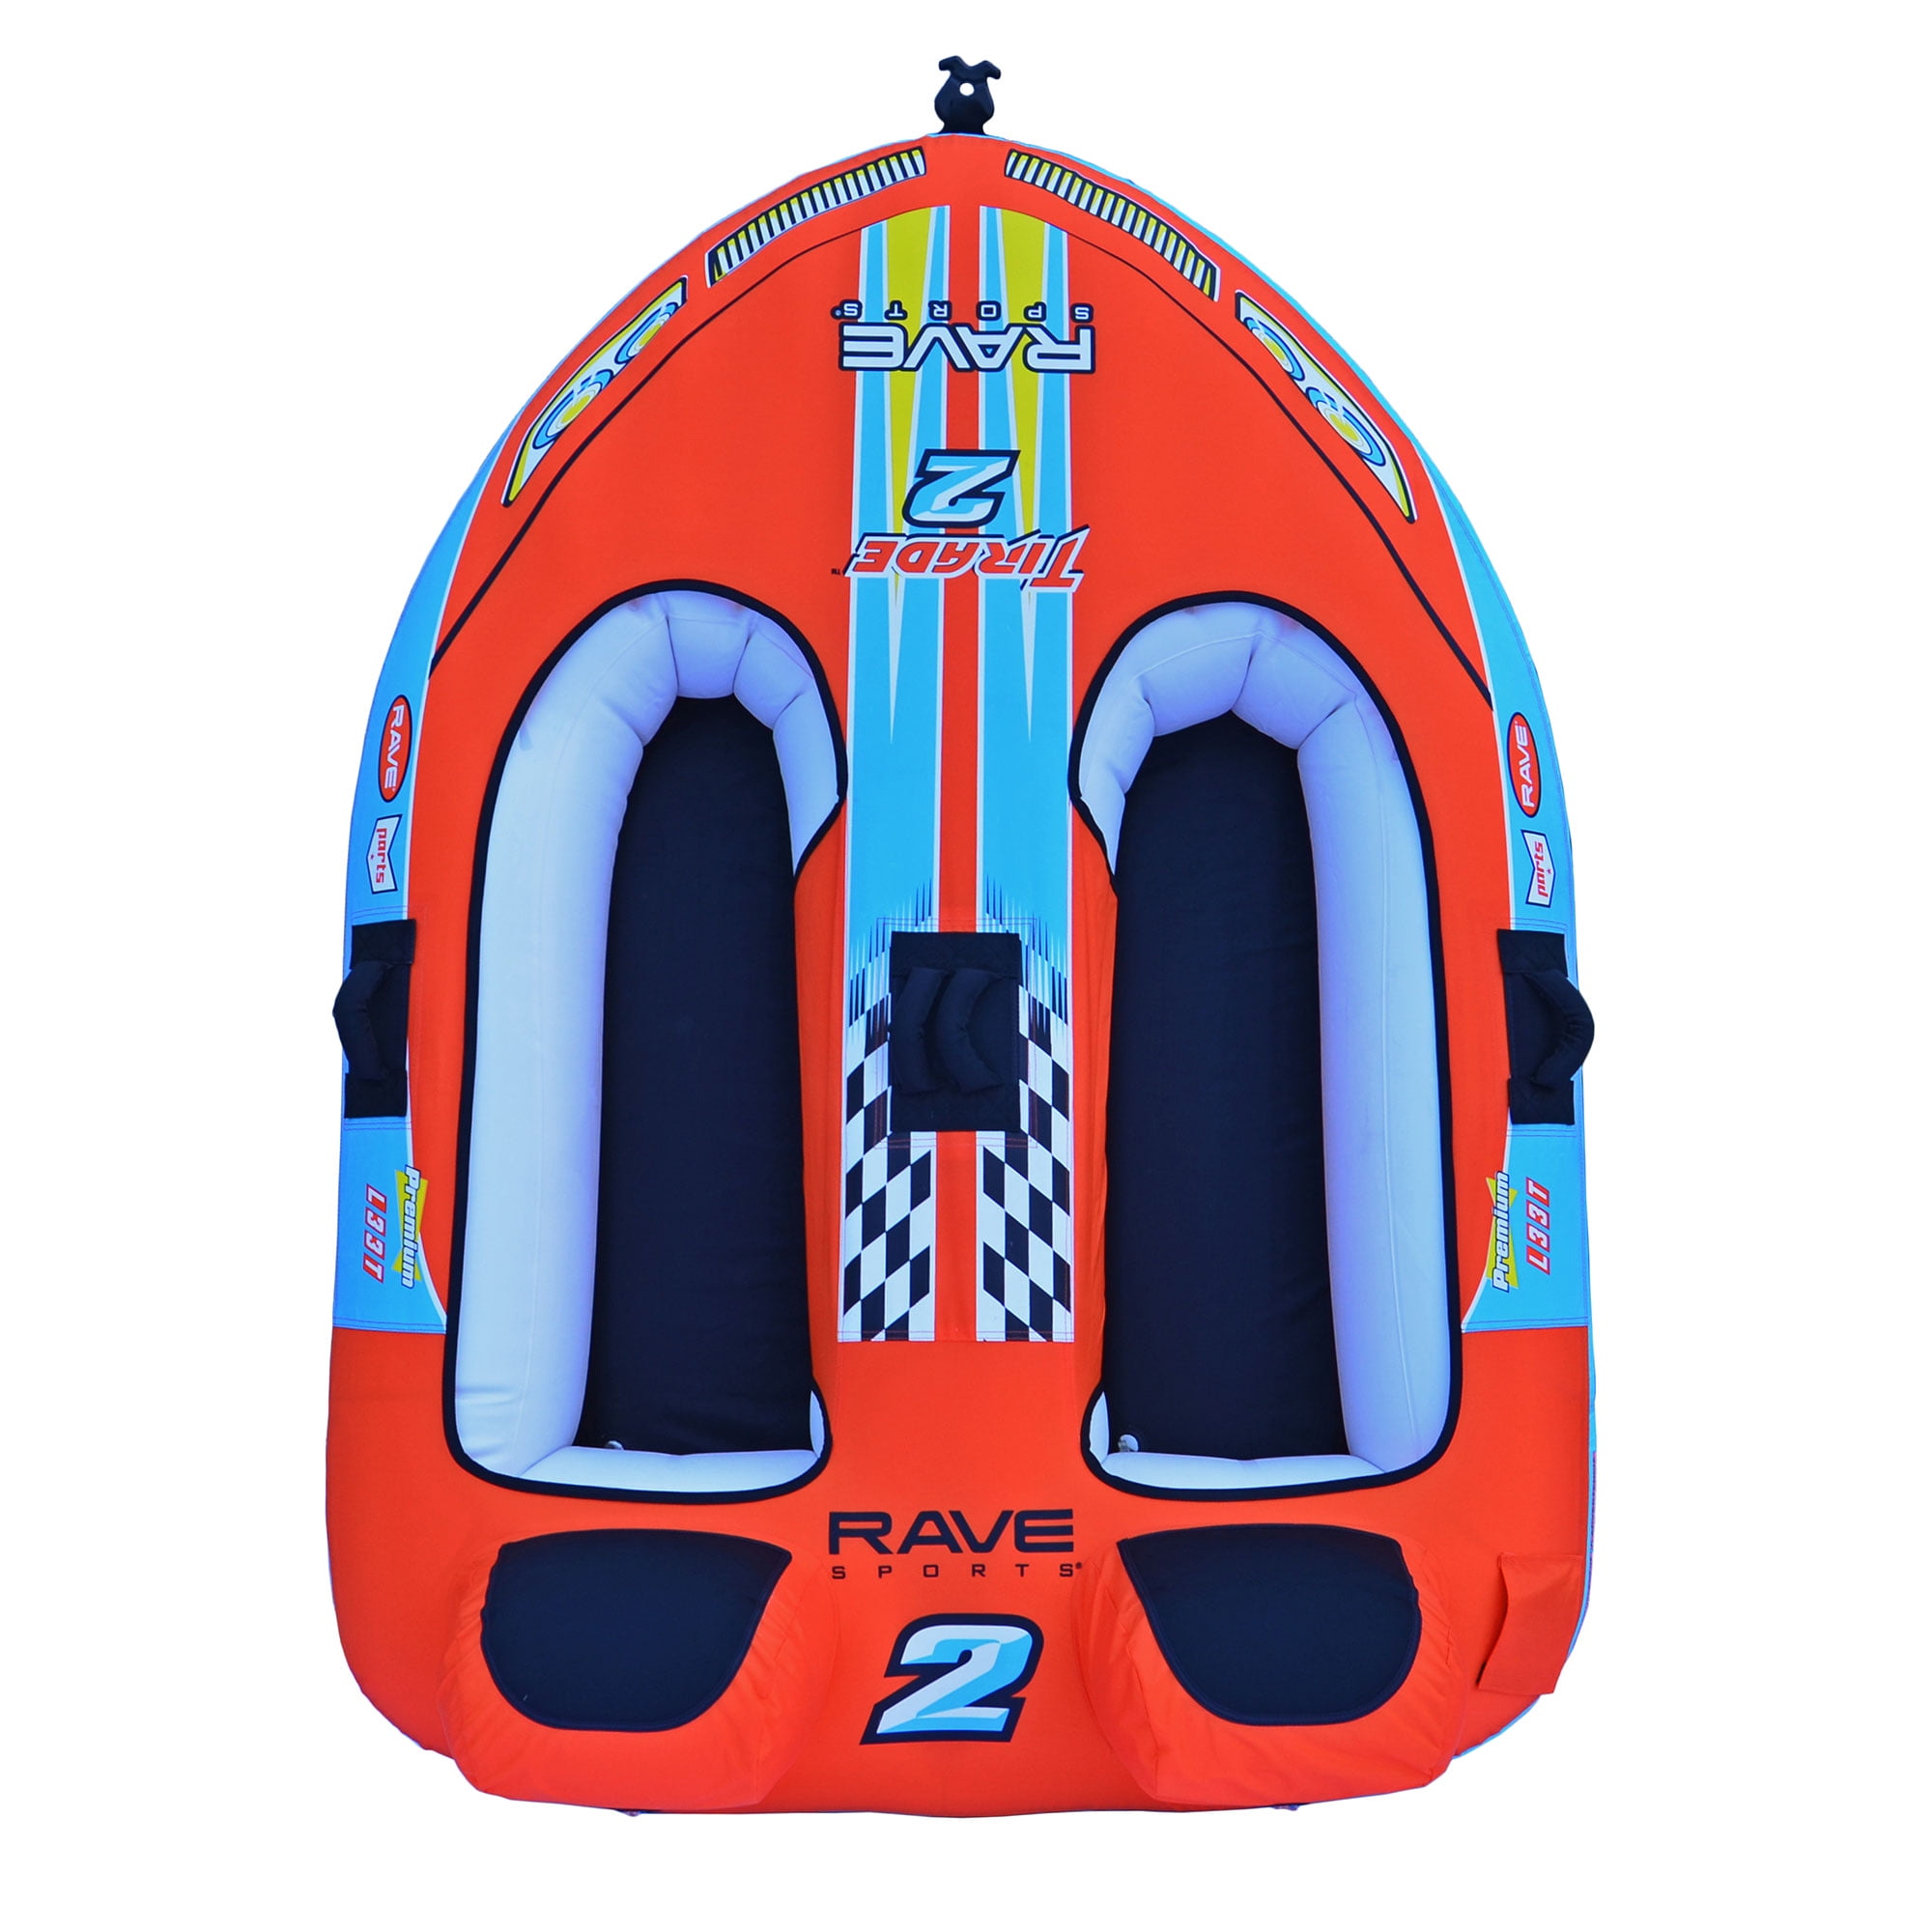 Rave Sports Storm Towable Inflatable Tube for sale online 